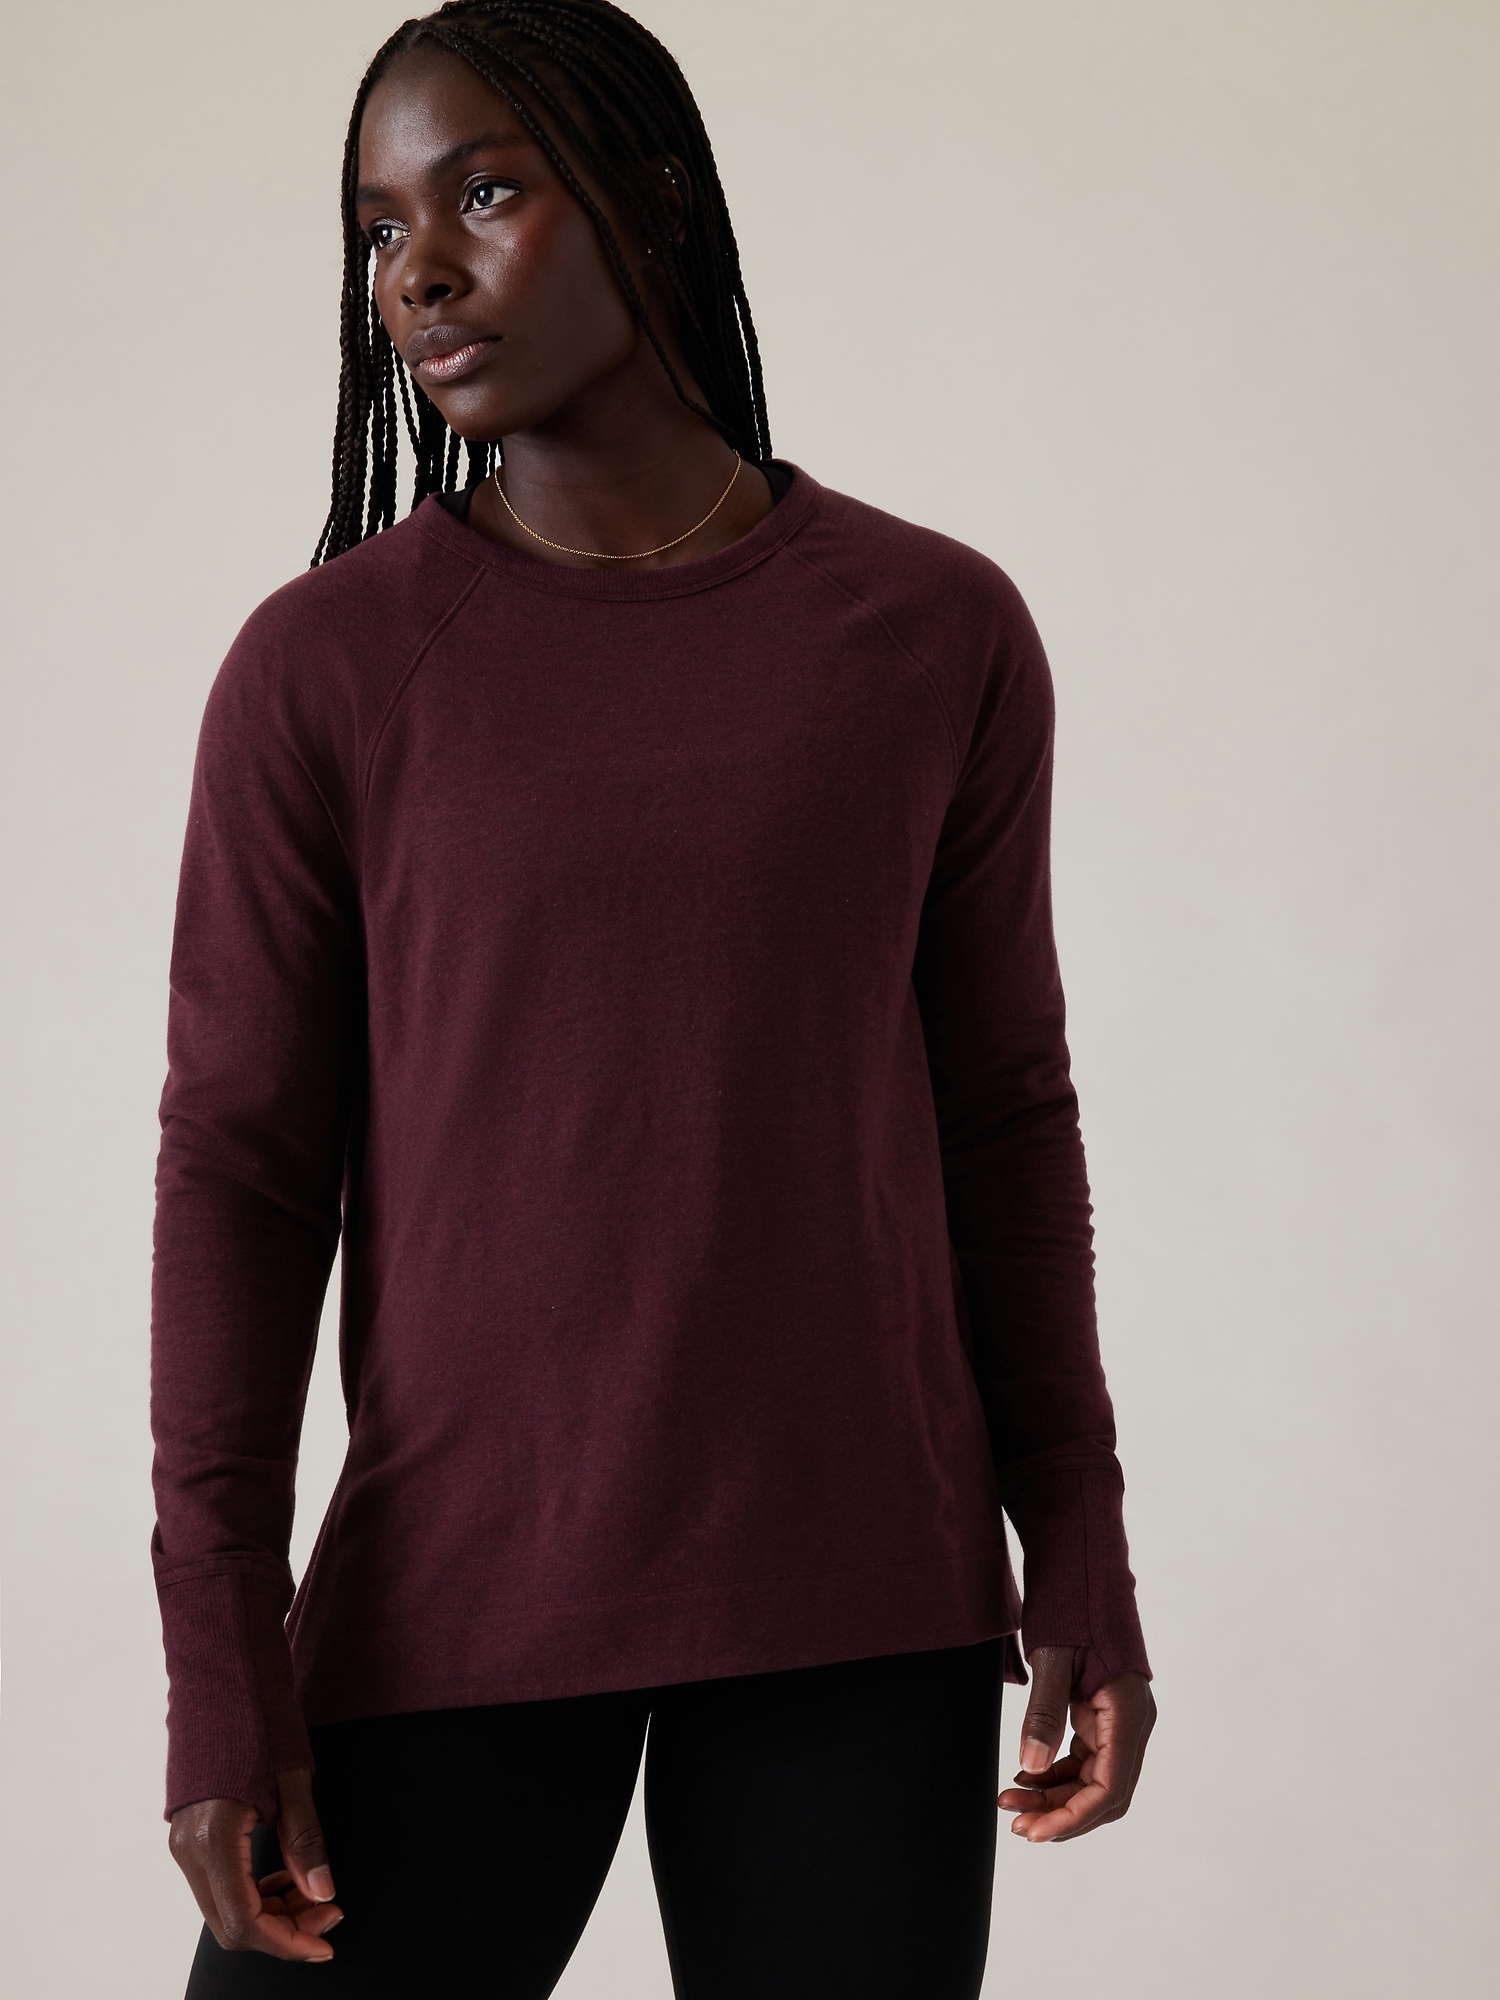 Athleta Coaster Luxe Recover Sweatshirt In Spiced Cabernet Heather